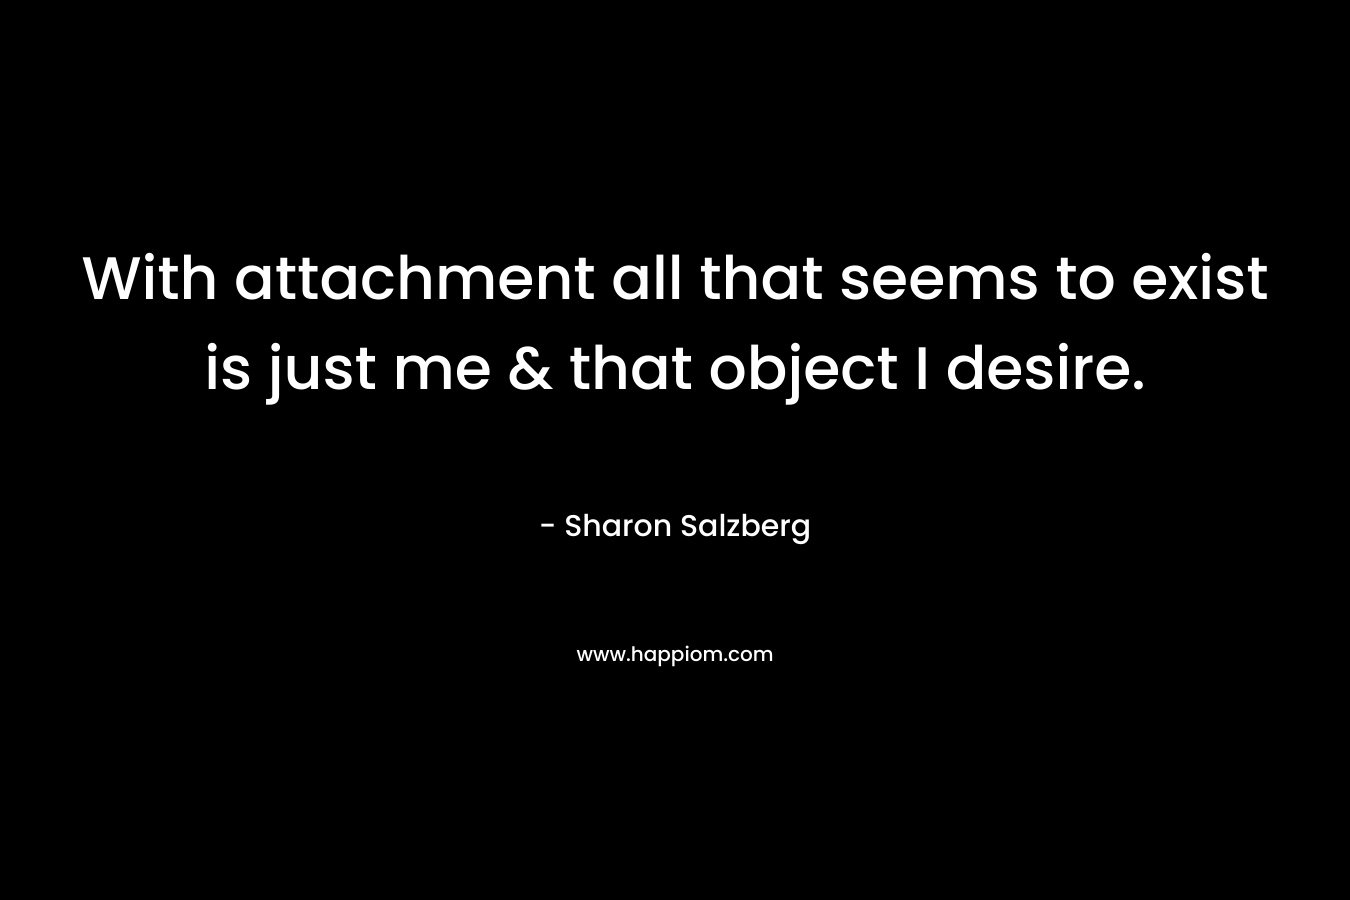 With attachment all that seems to exist is just me & that object I desire.